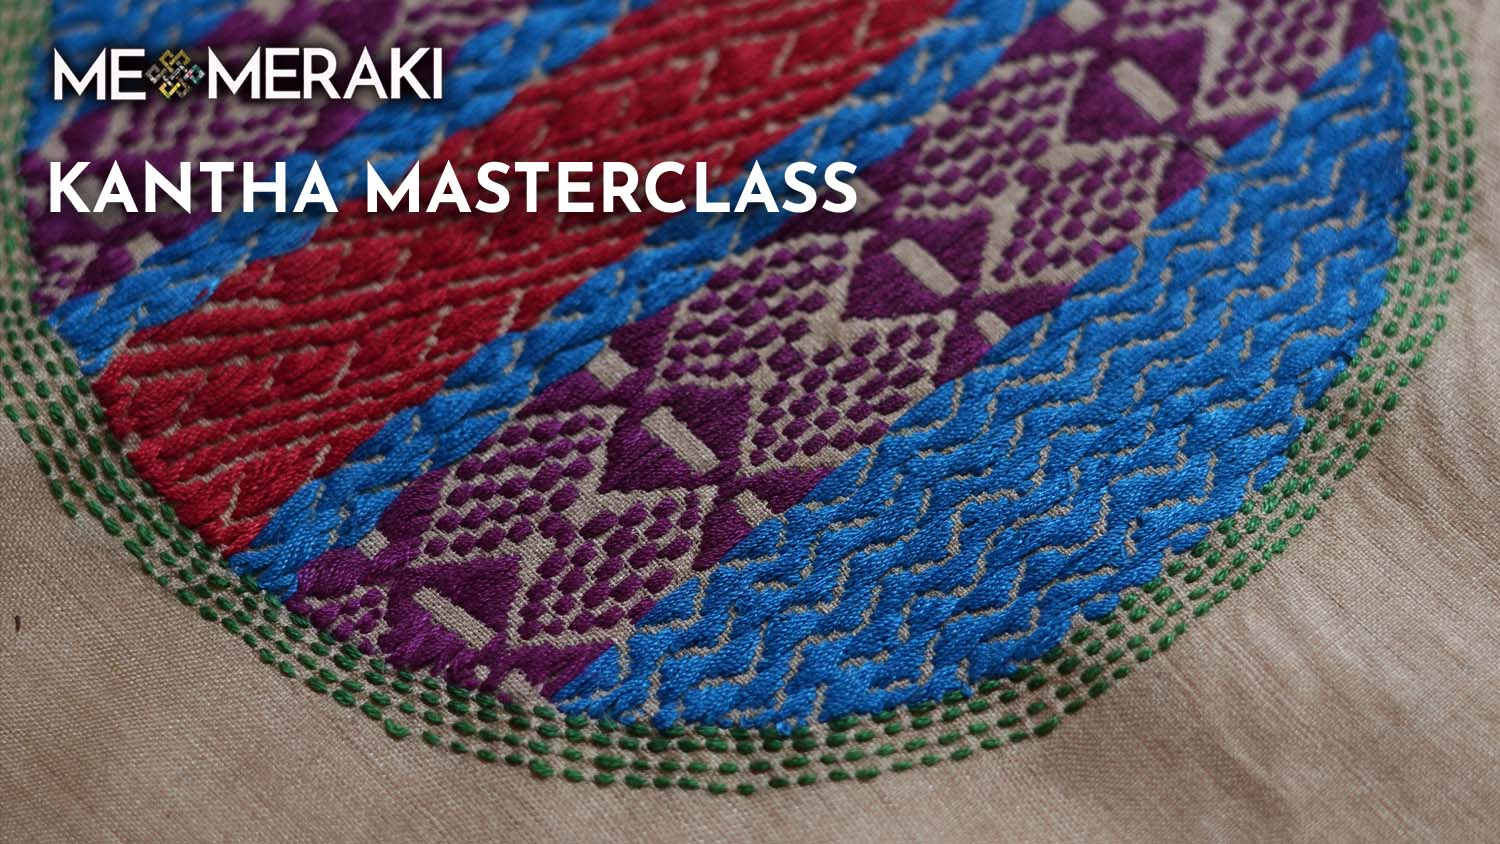 KANTHA MASTERCLASS (ON DEMAND, PRE-RECORDED, SELF PACED)